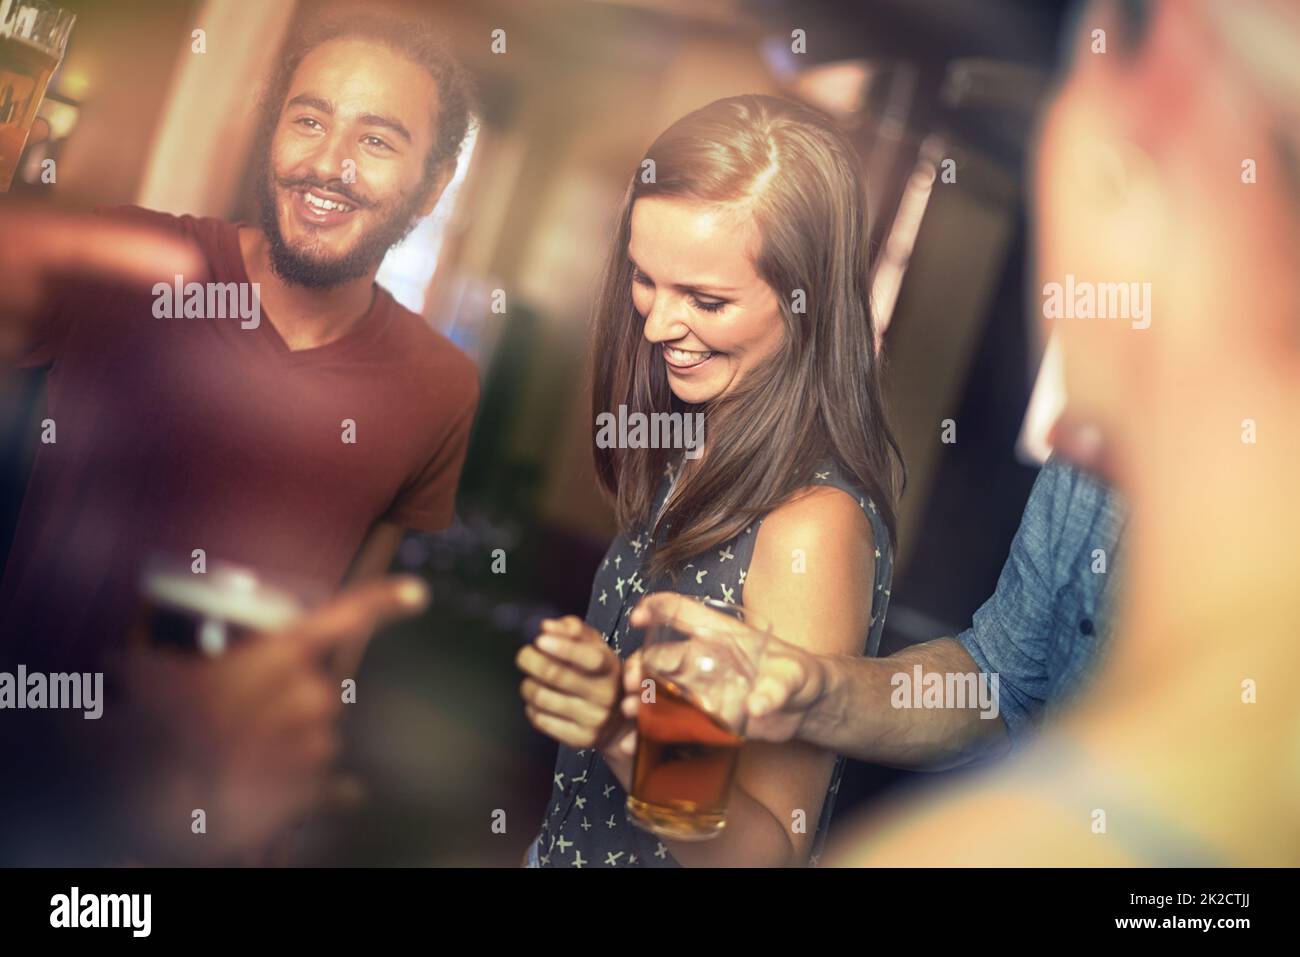 Good times with good friends. Shot of friends drinking and having fun in a pub. Stock Photo